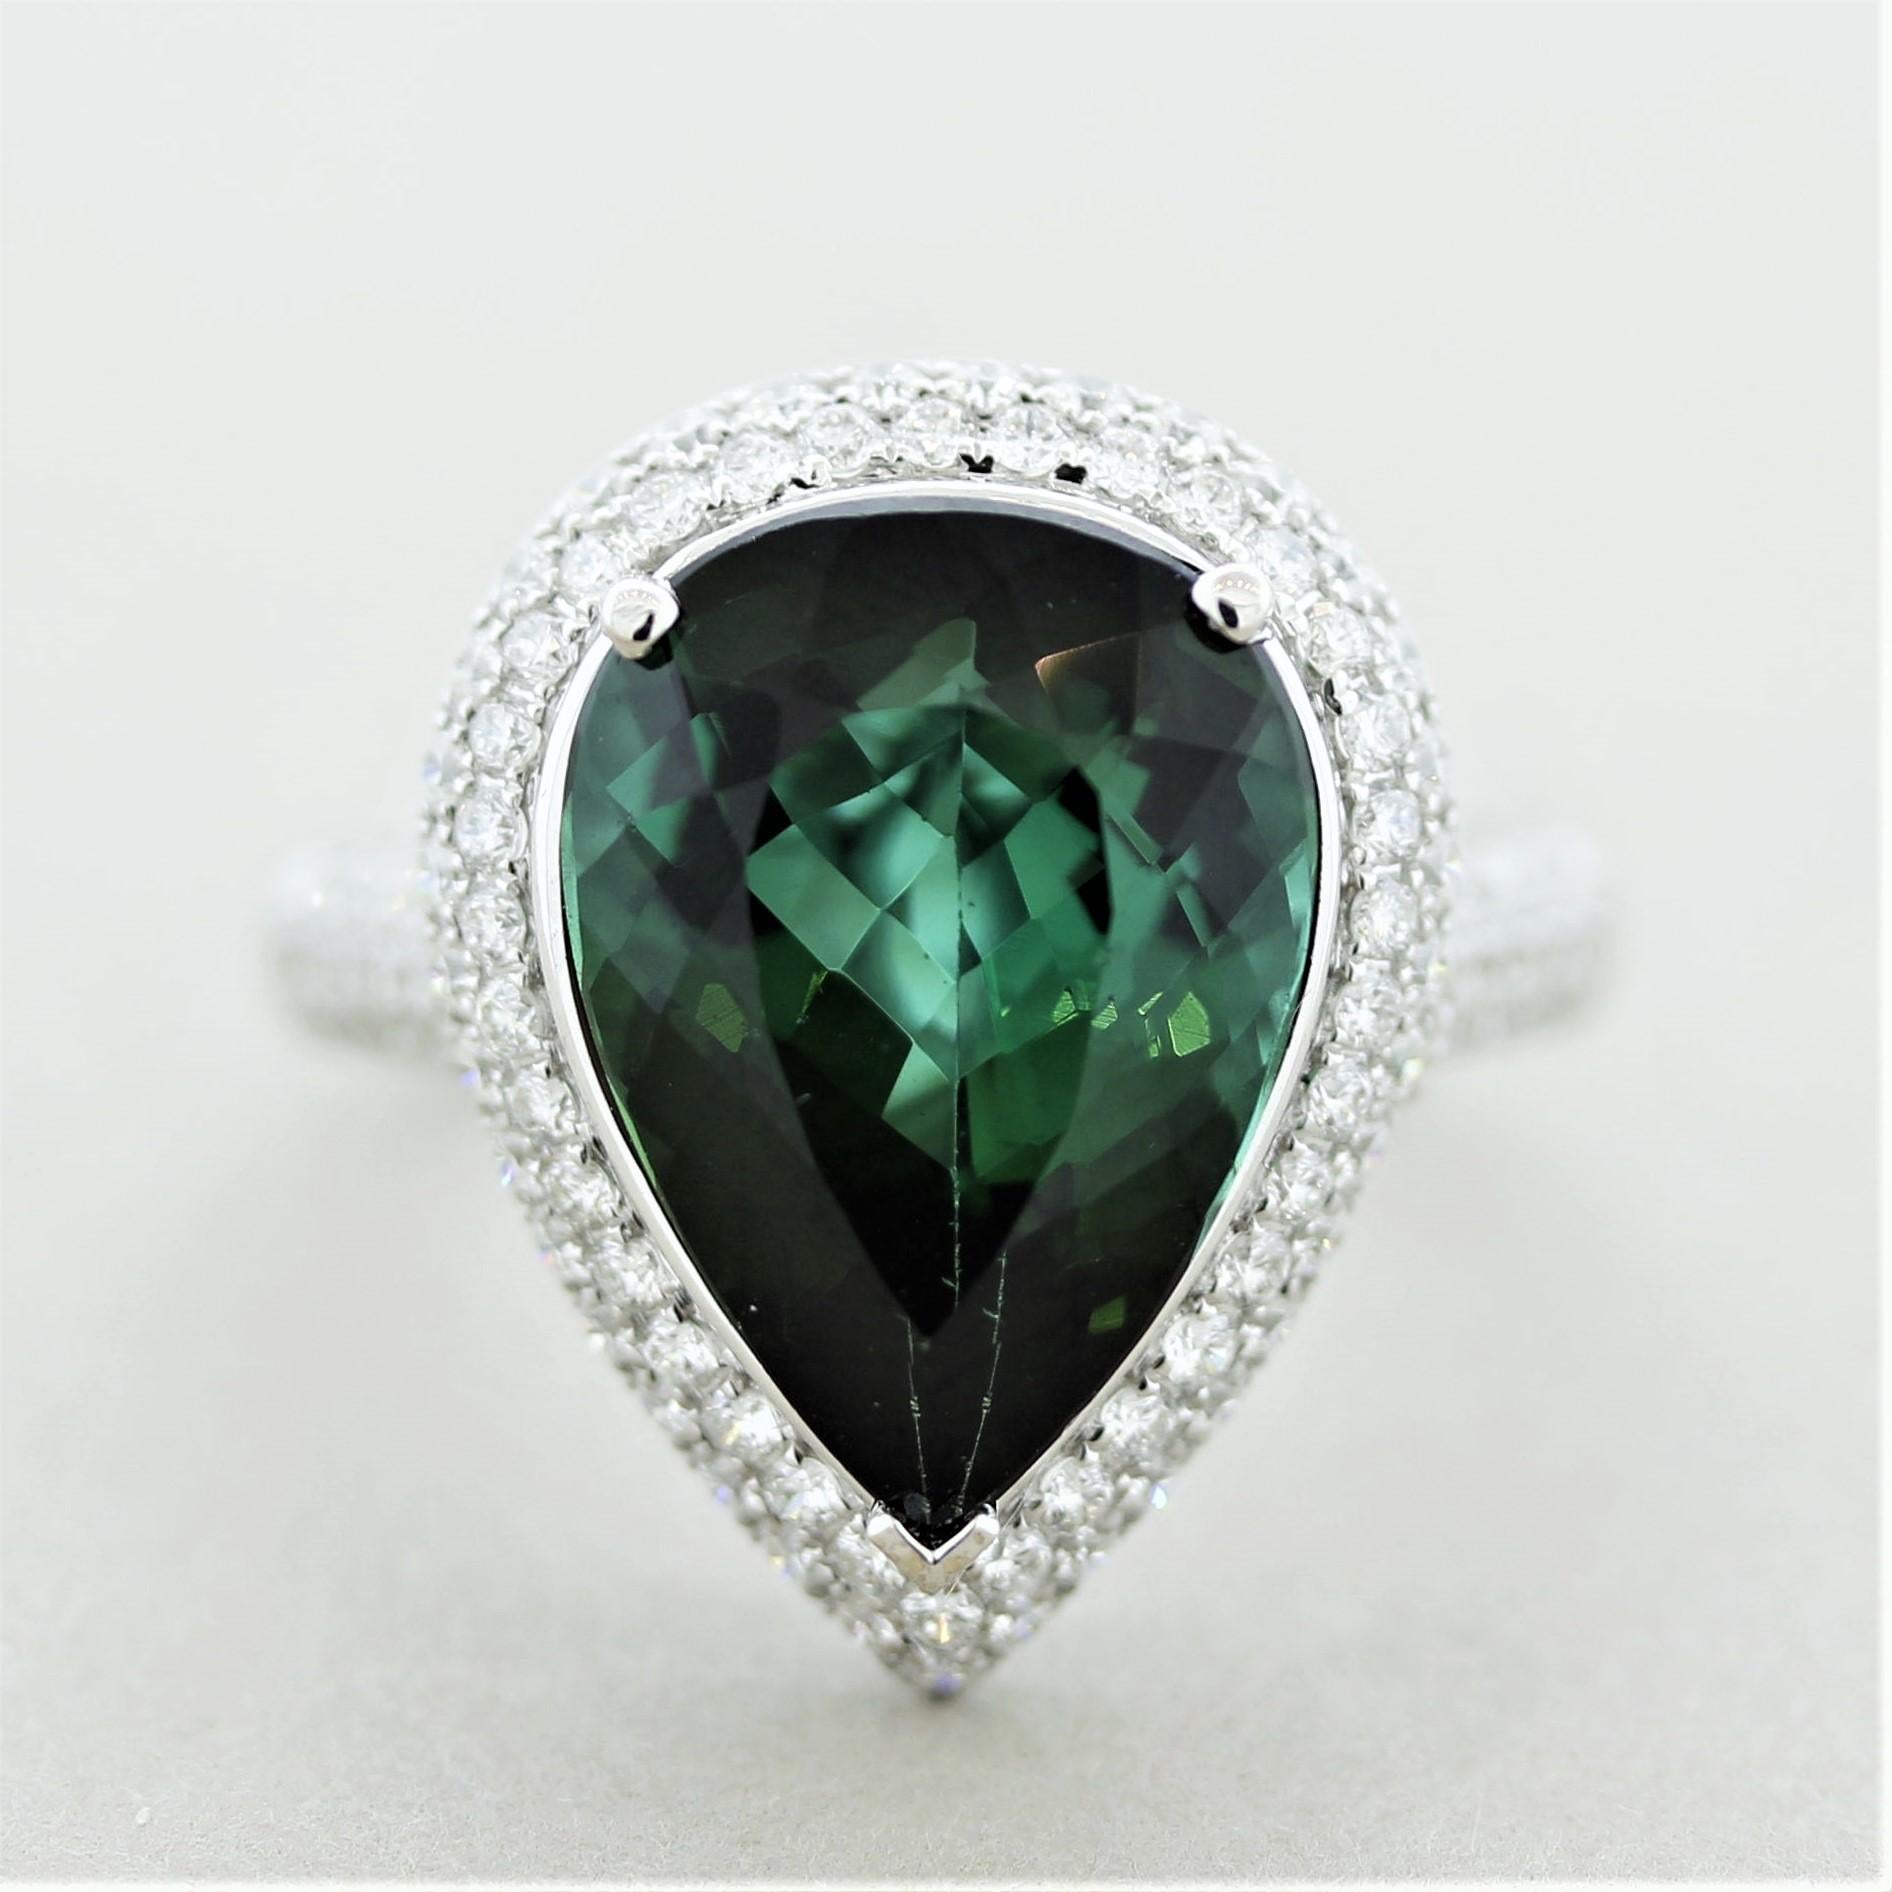 A sweet and stylish ring featuring a gem tourmaline weighing 7.11 carats. It has a rich and intense green color and is free from any eye-visible inclusions. Accenting the tourmaline are 0.86 carats of fine round brilliant-cut diamonds which are